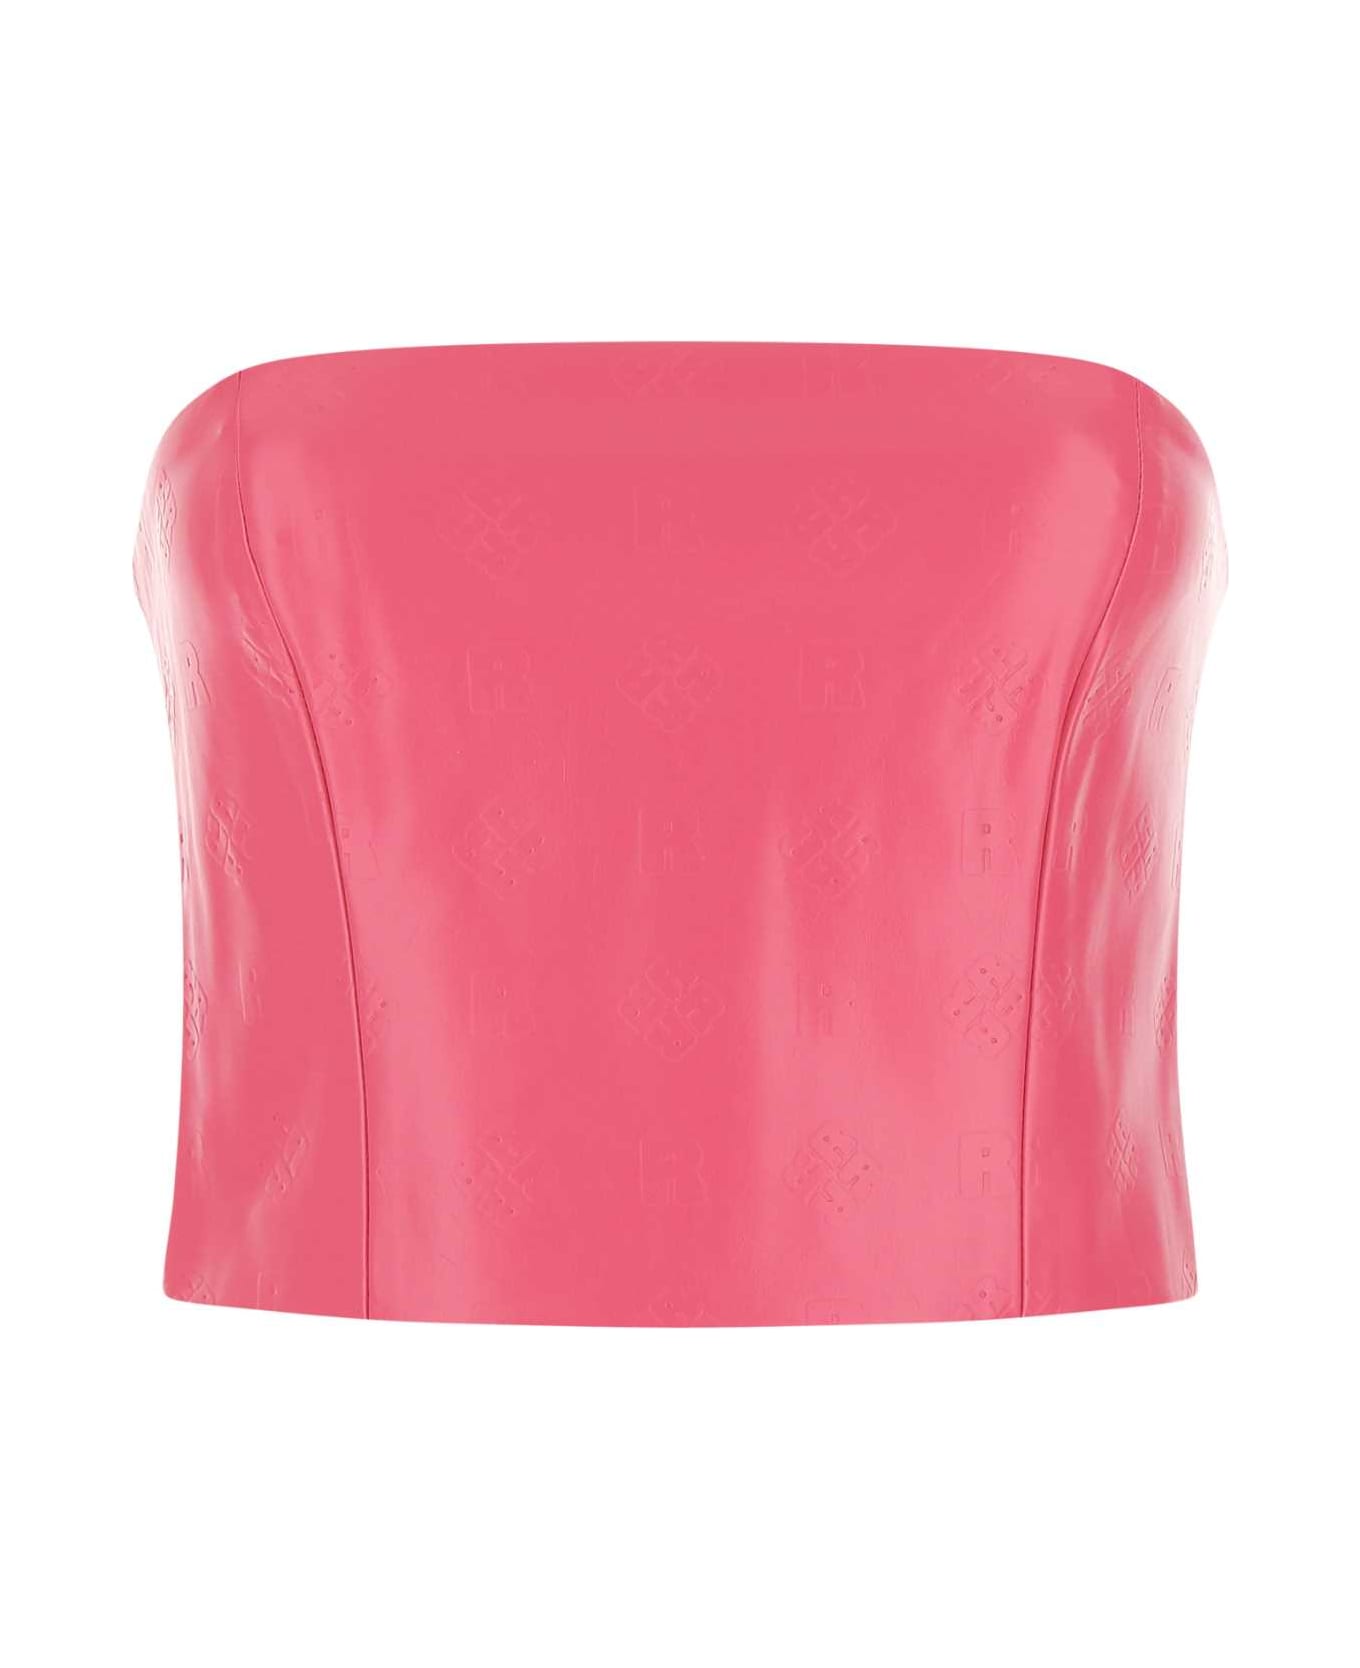 Rotate by Birger Christensen Fuchsia Synthetic Leather Emili Top - 182436